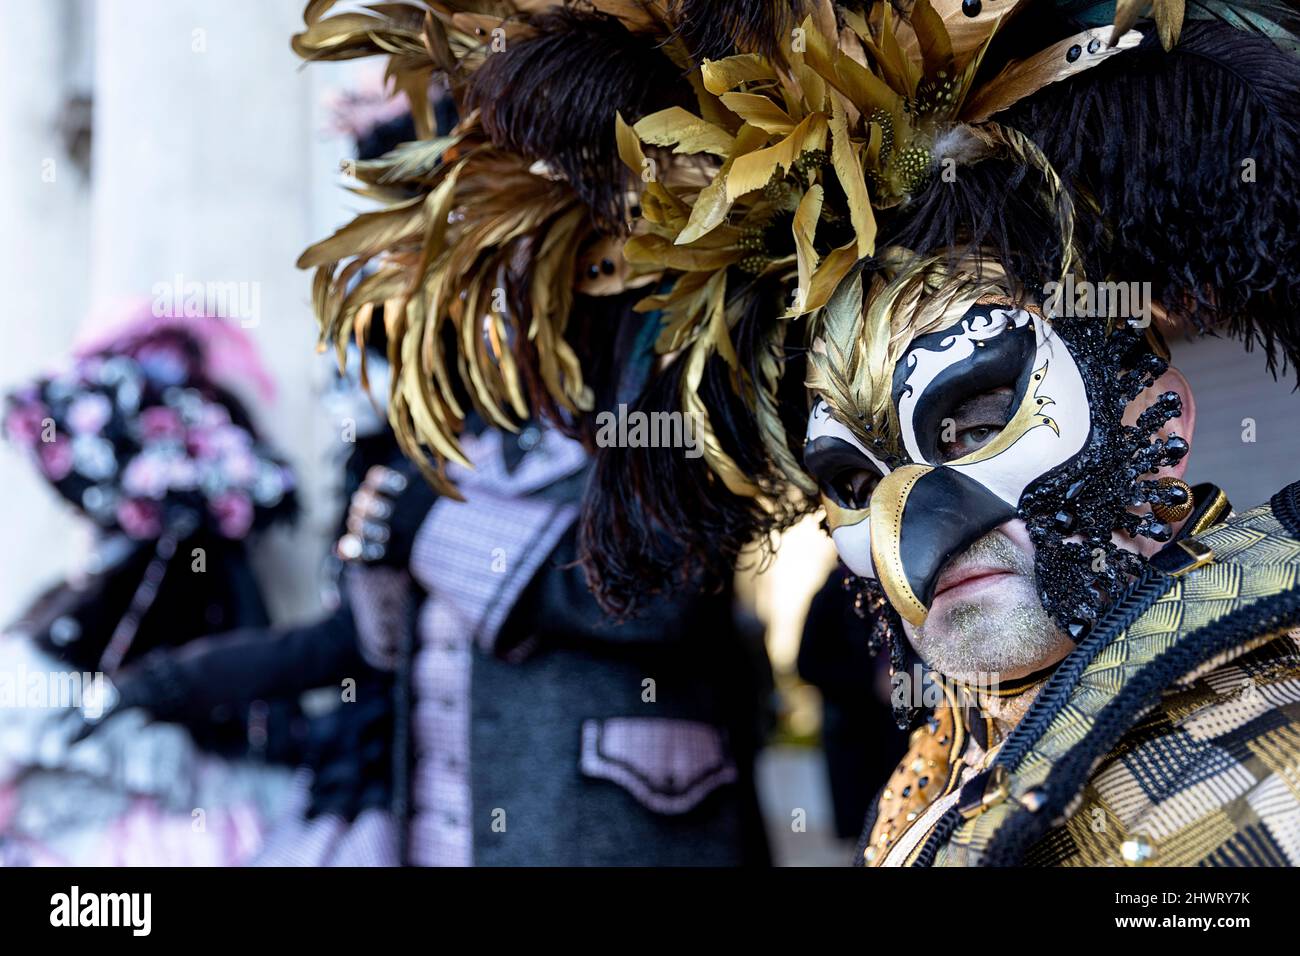 Man in a interesting traditional venetian costume and mask posing at the Venice carneval. St. Mark's Square, Venice Stock Photo